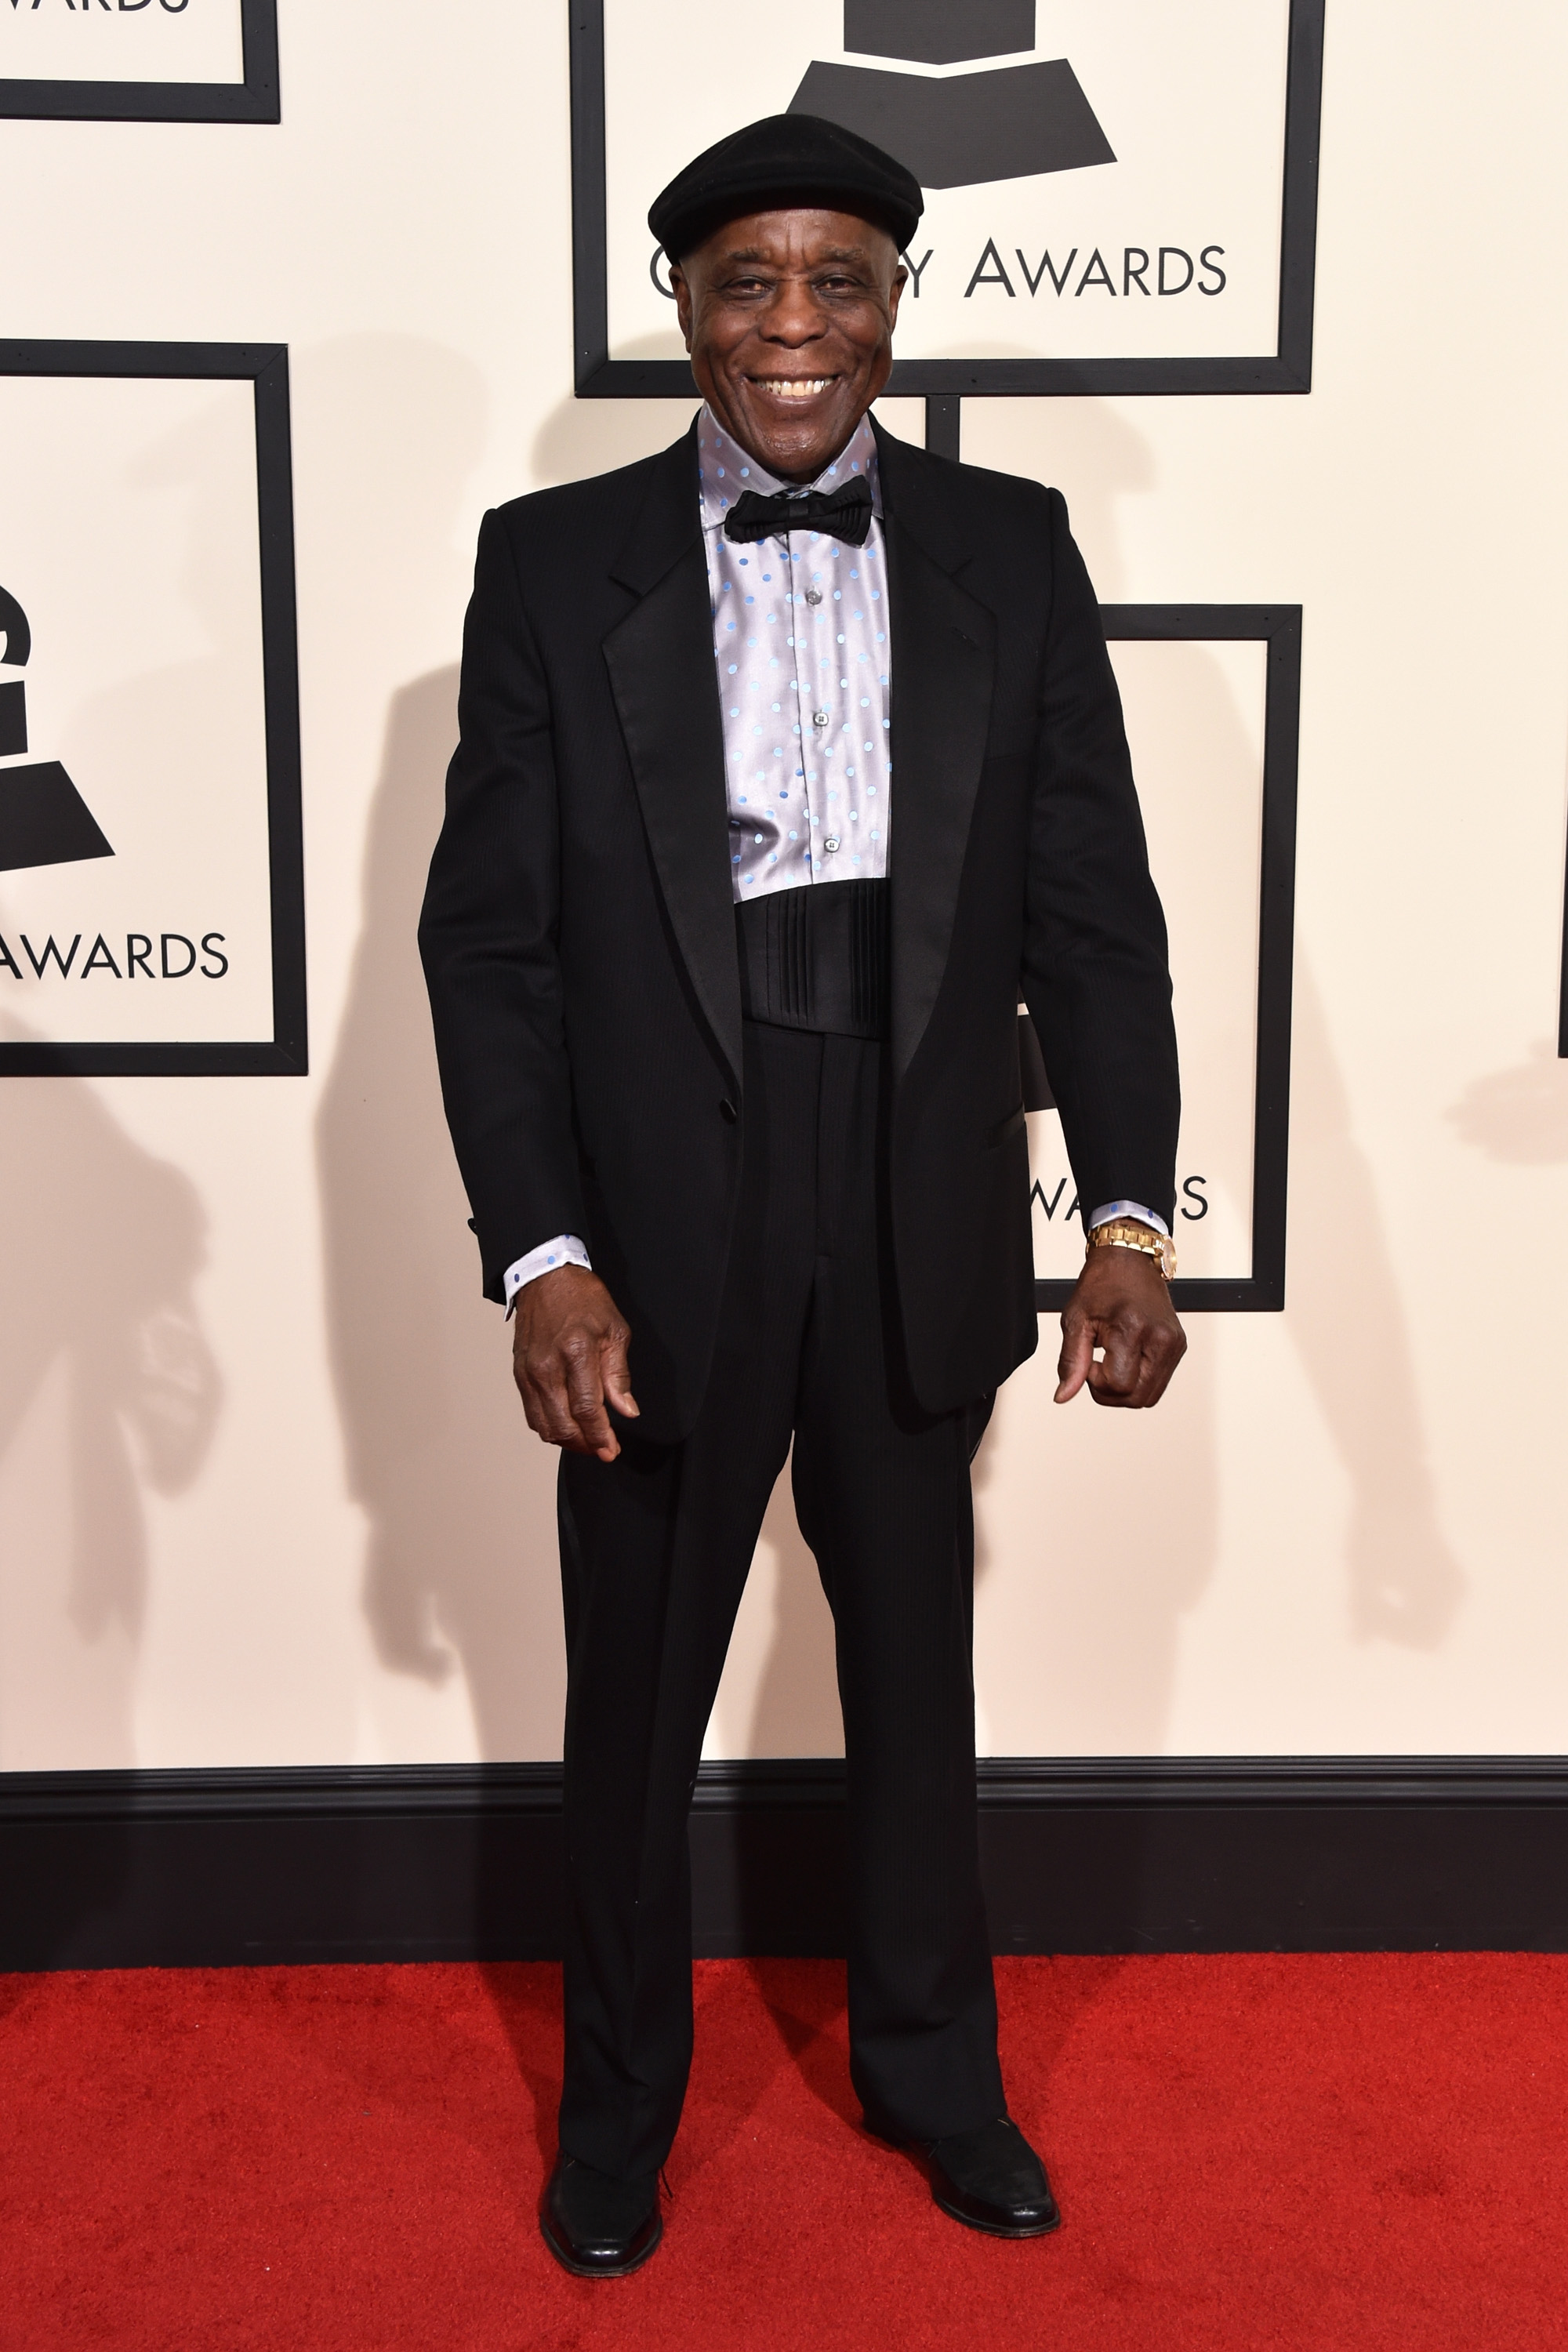 Buddy Guy attends the 58th GRAMMY Awards at Staples Center on Feb. 15, 2016 in Los Angeles.